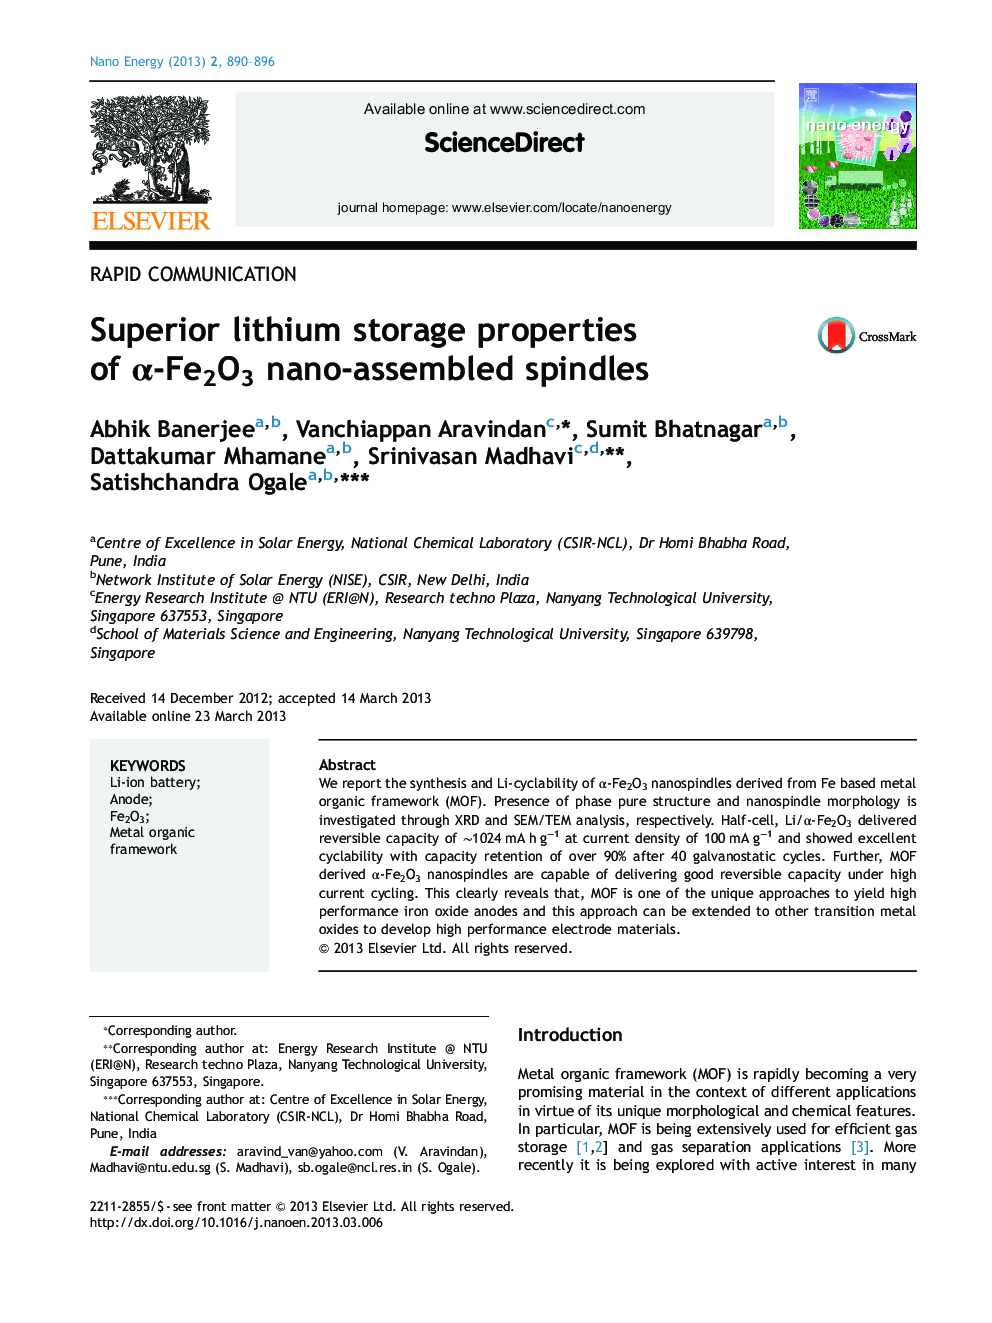 Superior lithium storage properties of α-Fe2O3 nano-assembled spindles